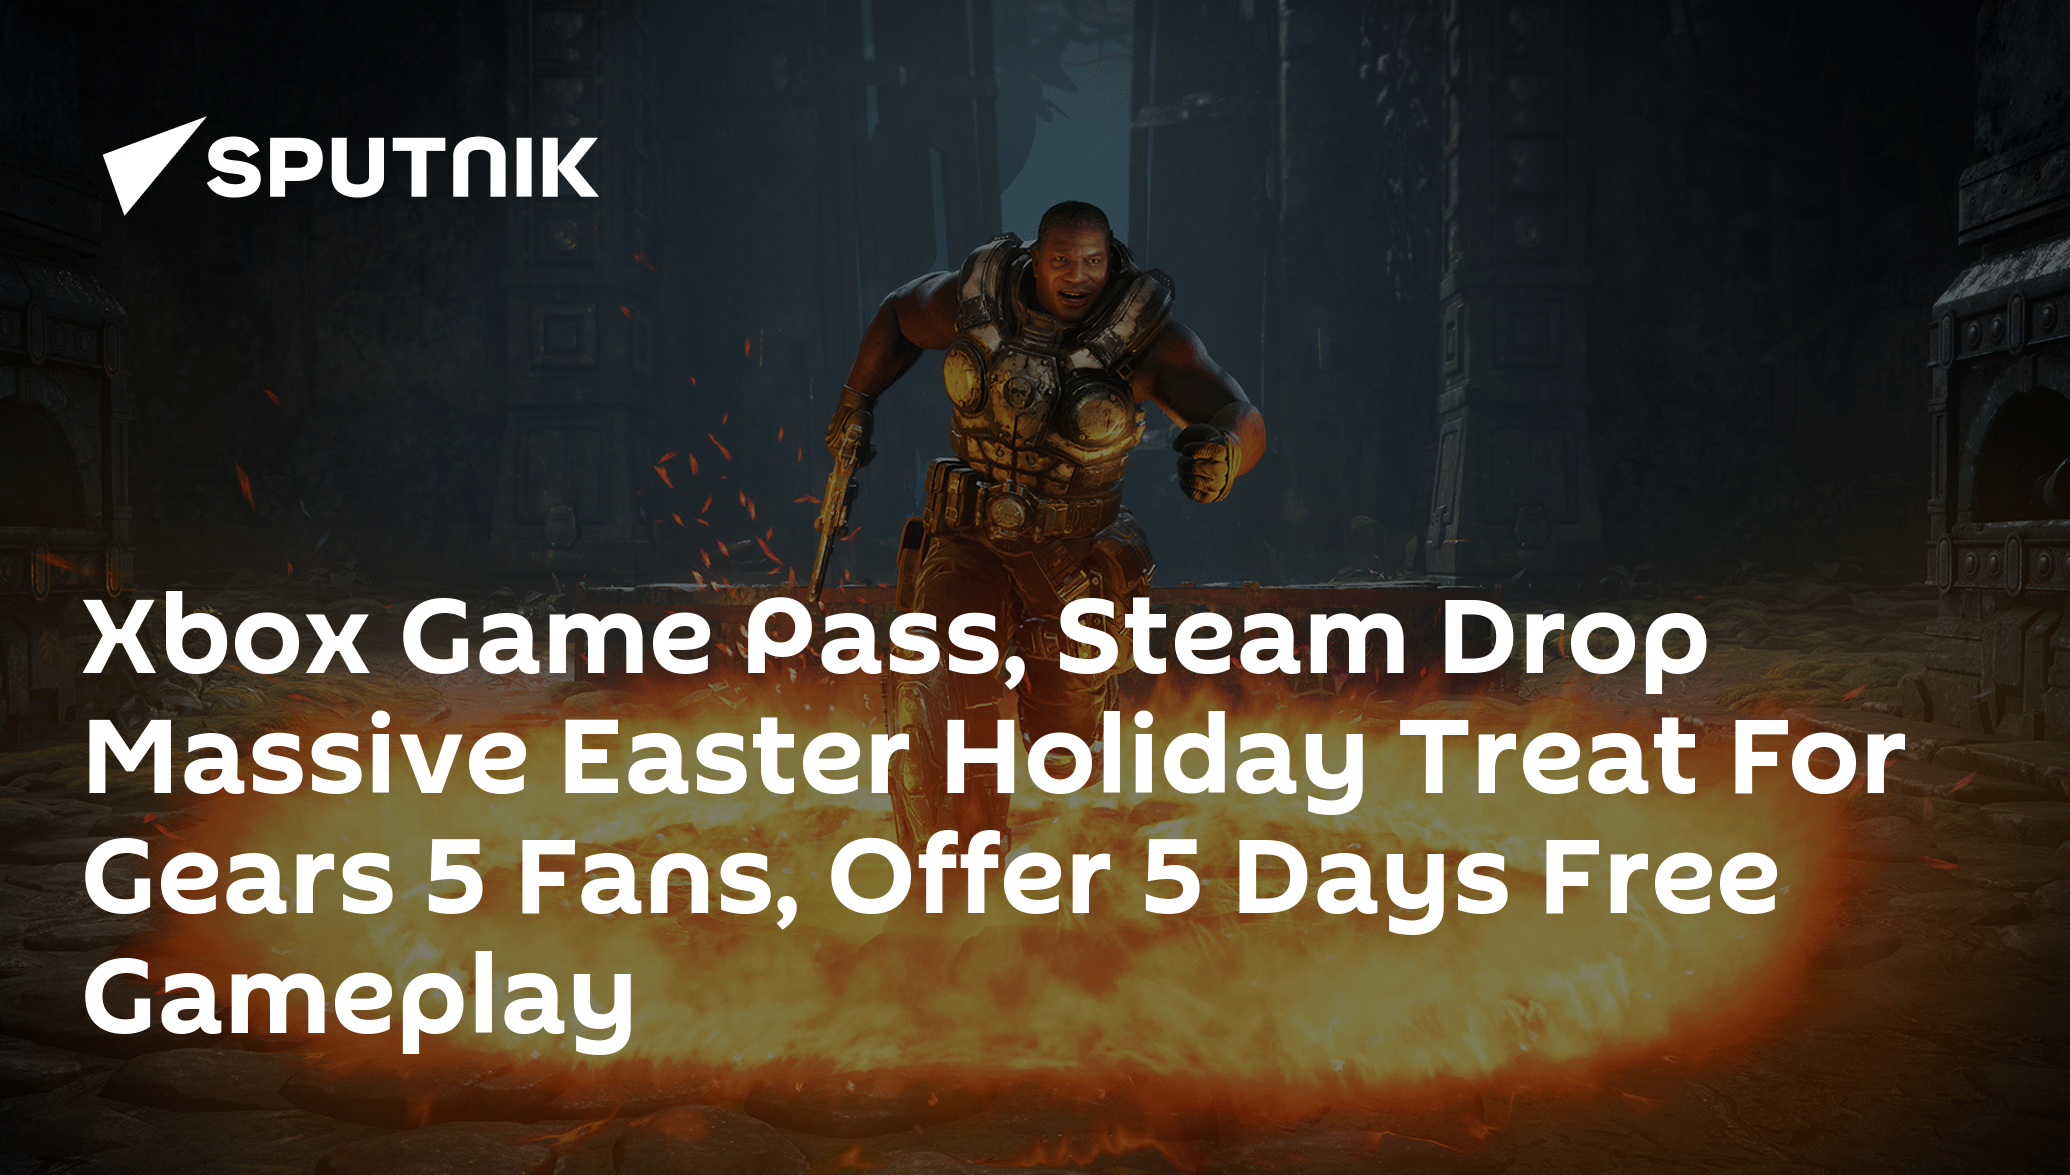 Xbox Game Pass, Steam Drop Massive Easter Holiday Treat For Gears